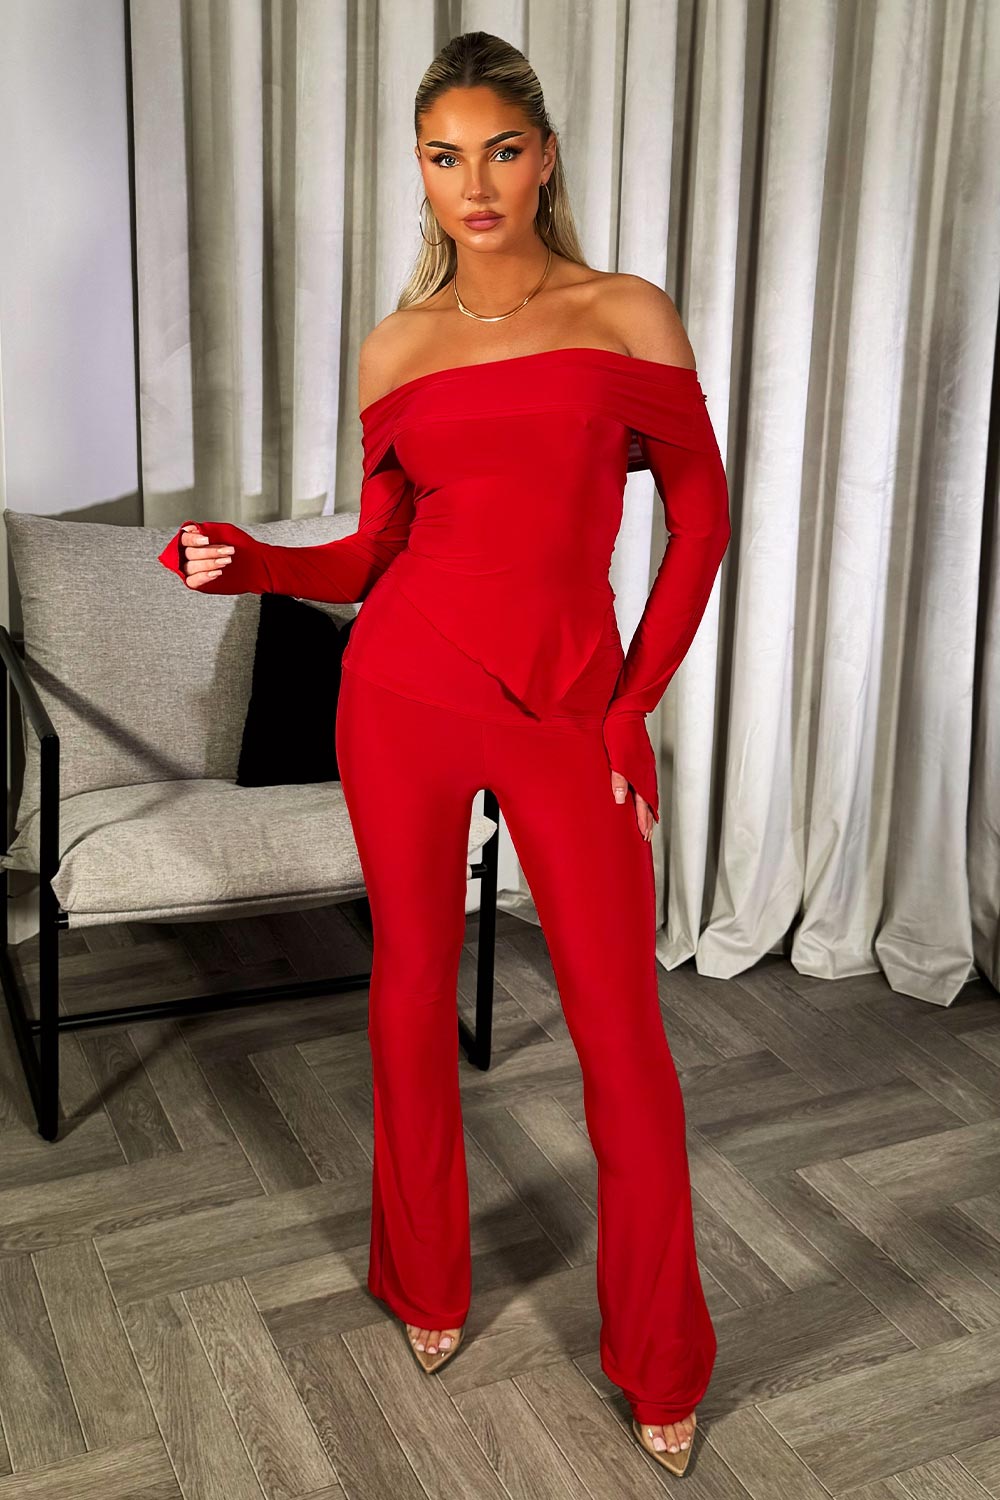 fold detail flare trousers and asymmetric off shoulder long sleeve top co ord double lined going out occasion summer festival clothes red